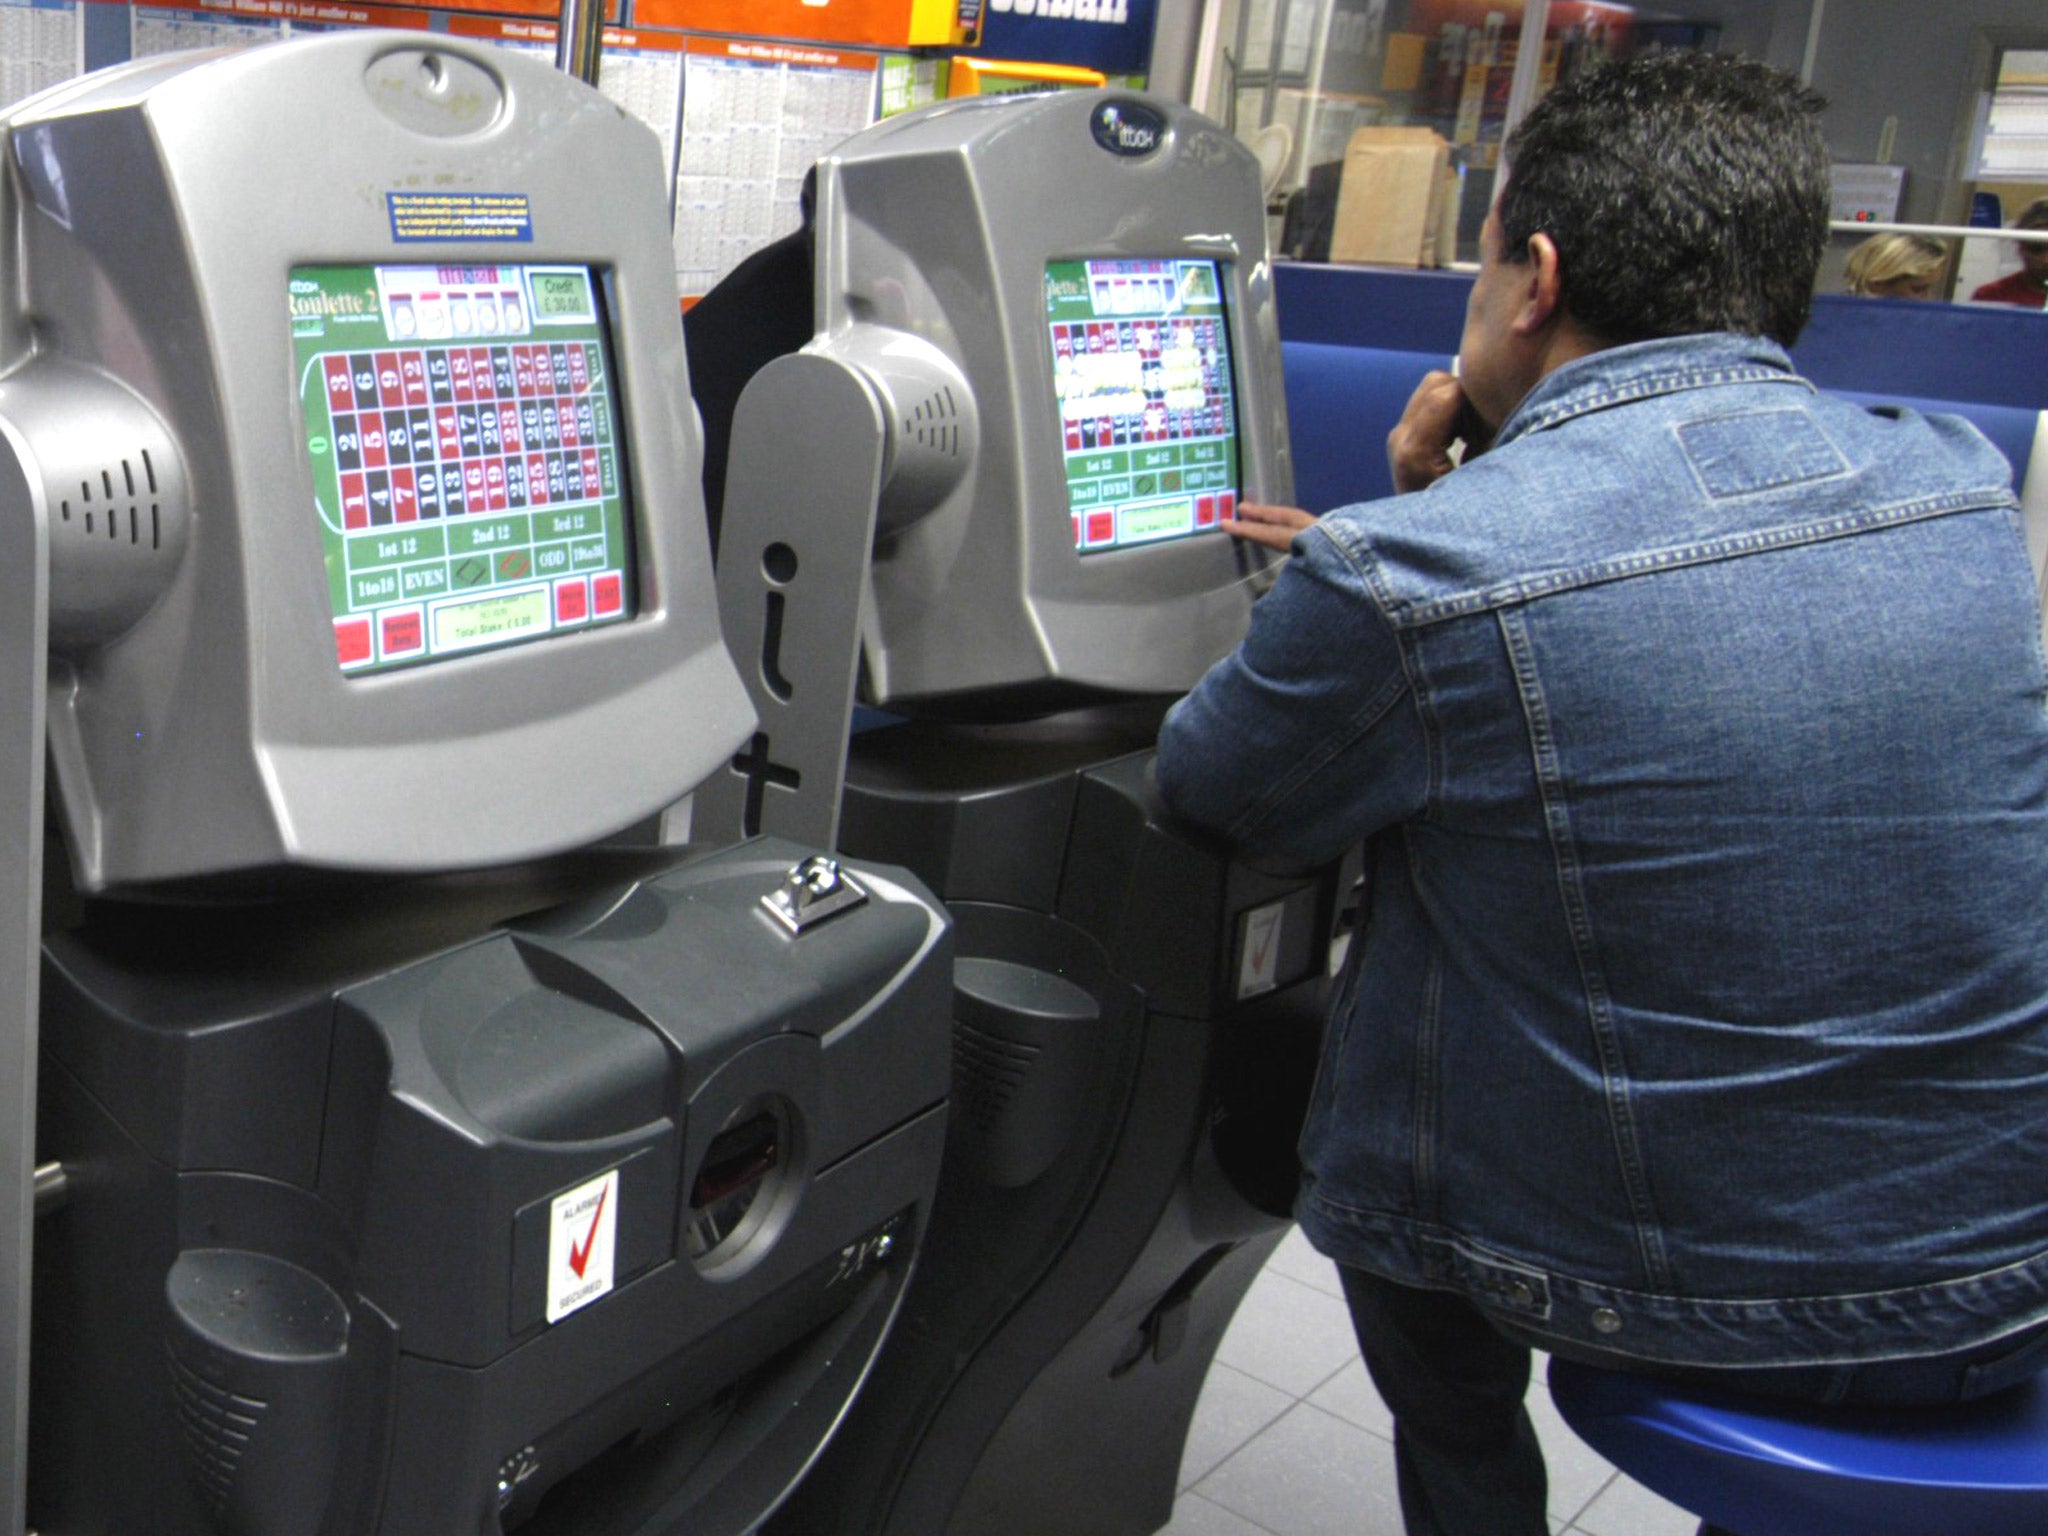 51 per cent of the net takings in betting shops came from fixed-odds betting terminals